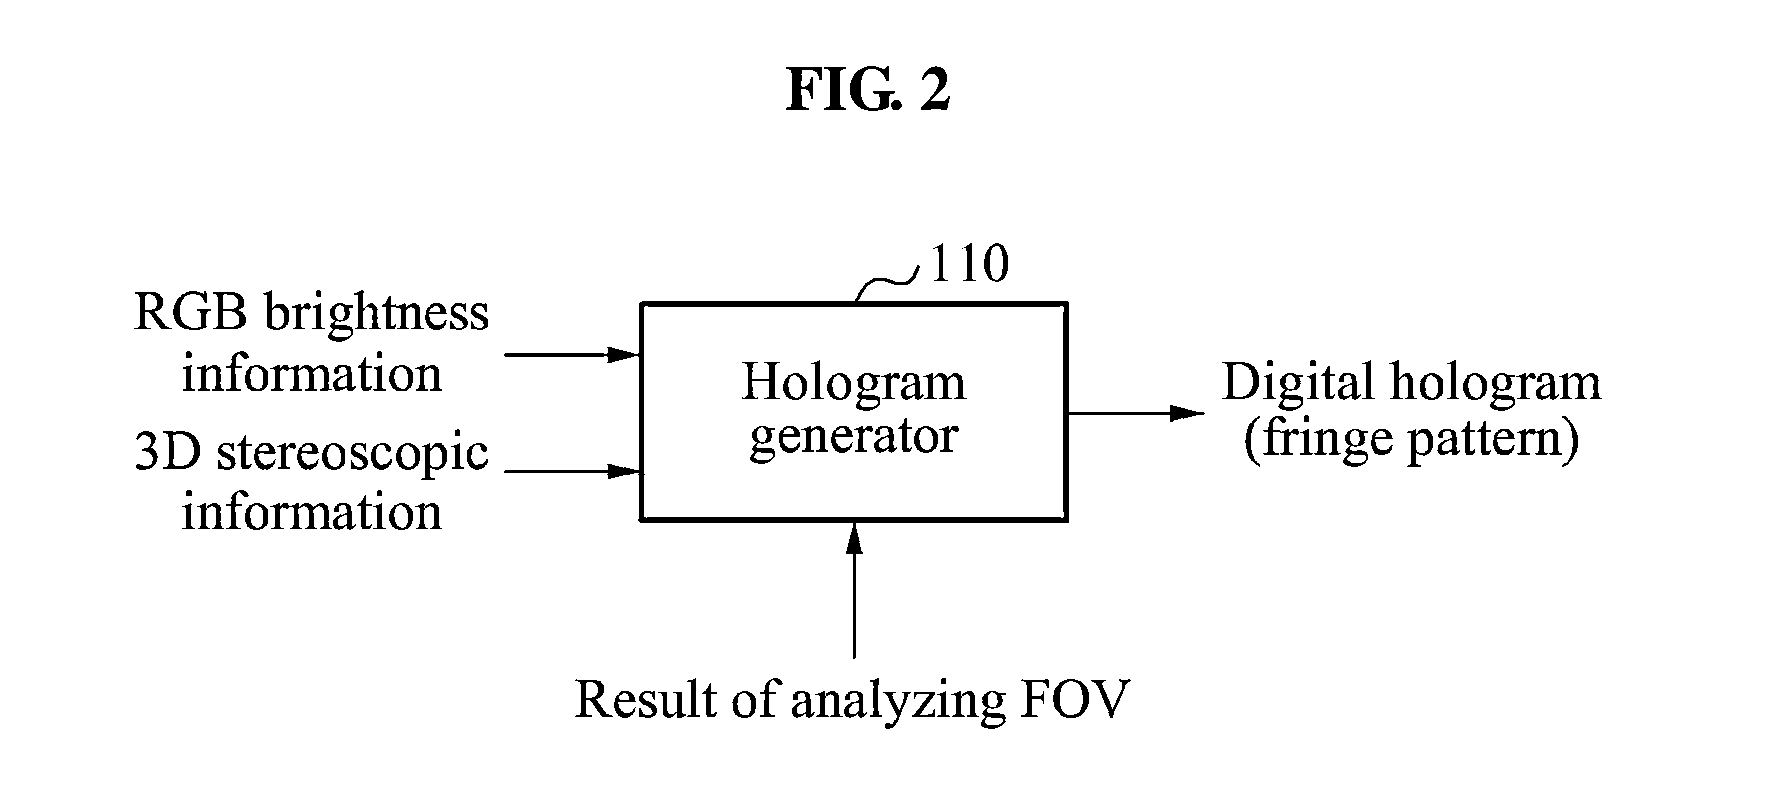 Apparatus and method for measuring and evaluating field of view (FOV) of reconstructed image of hologram